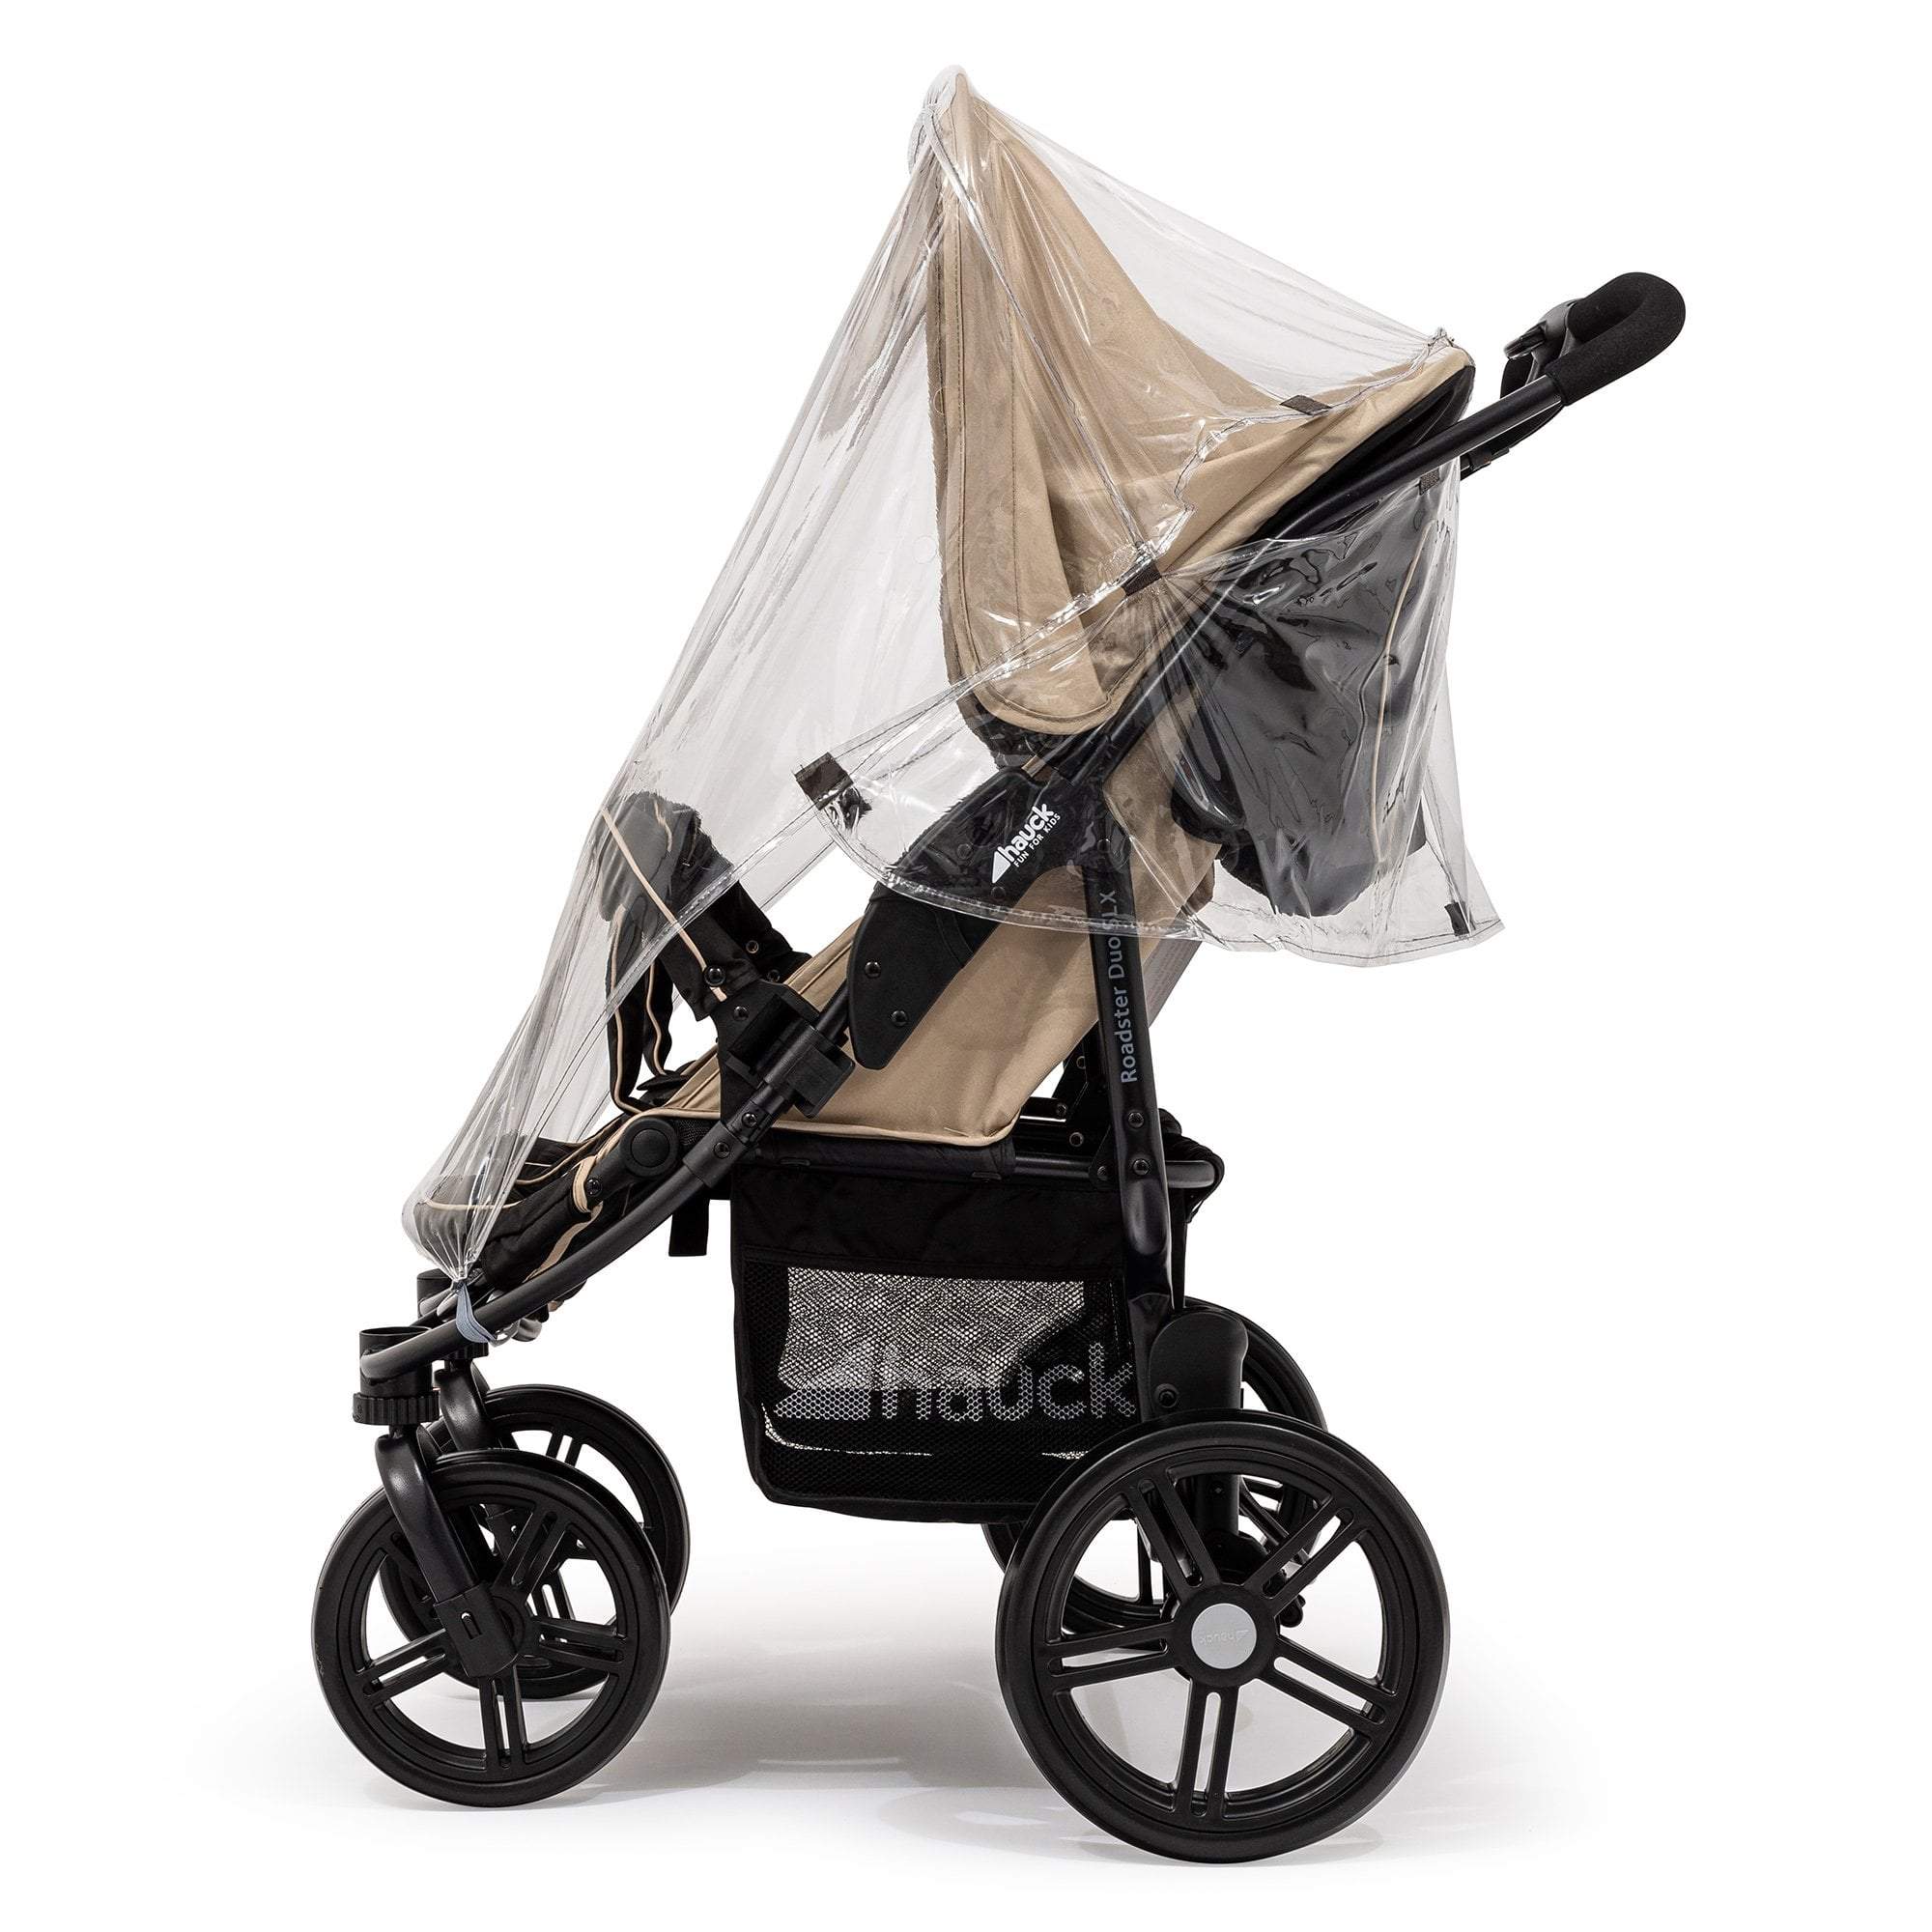 Side by Side Raincover Compatible with Britax - For Your Little One